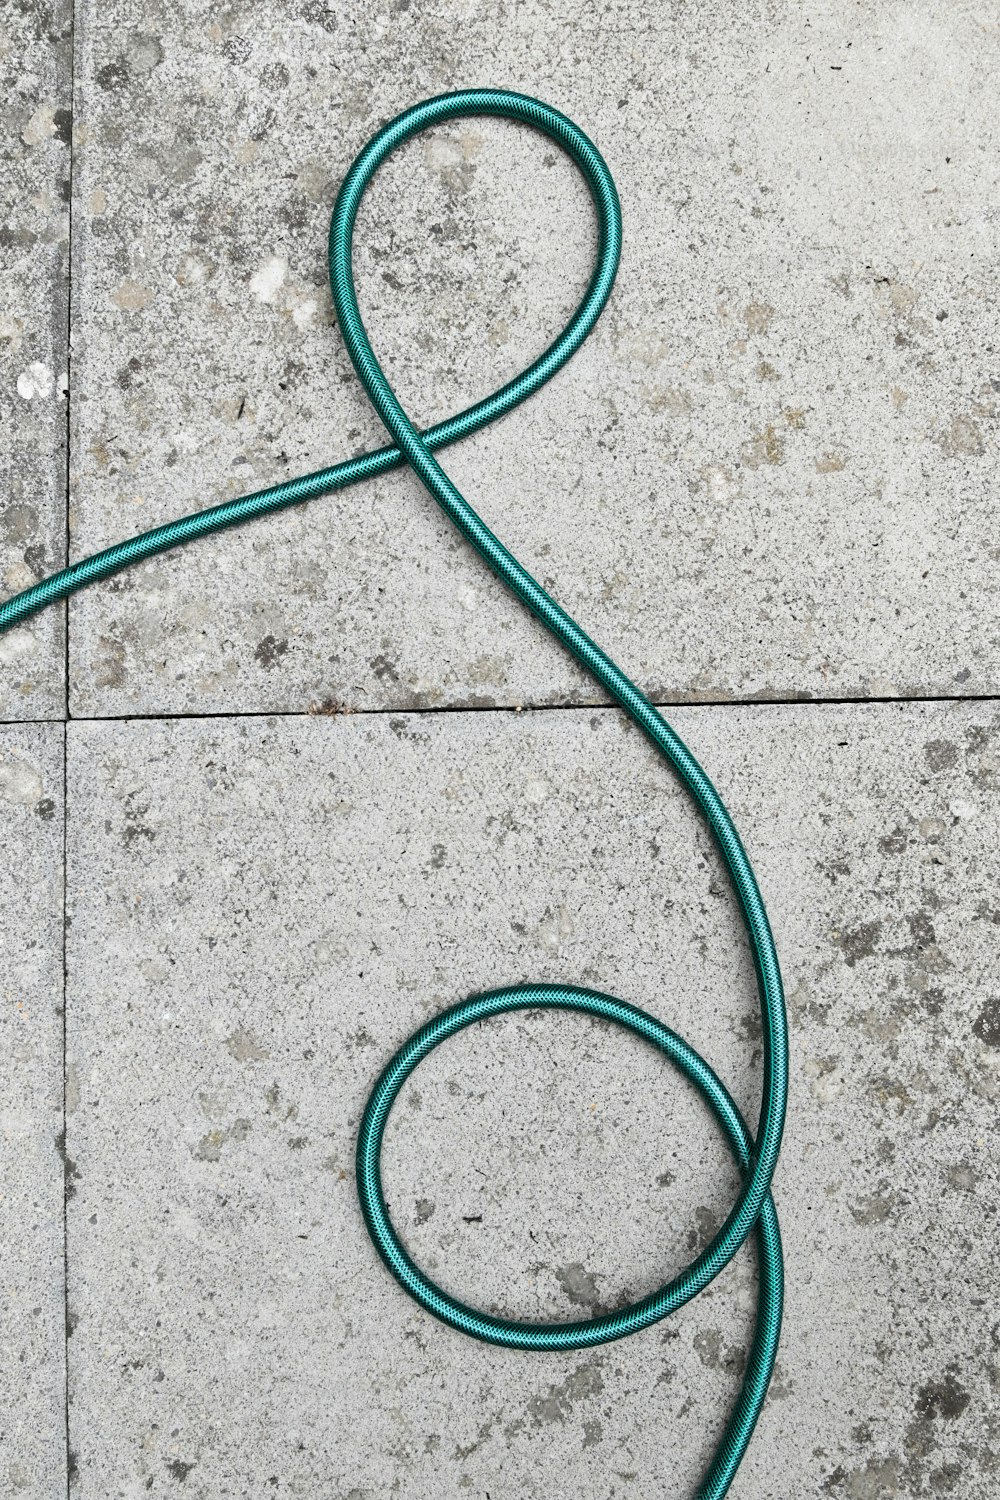 a green hose laying on the ground